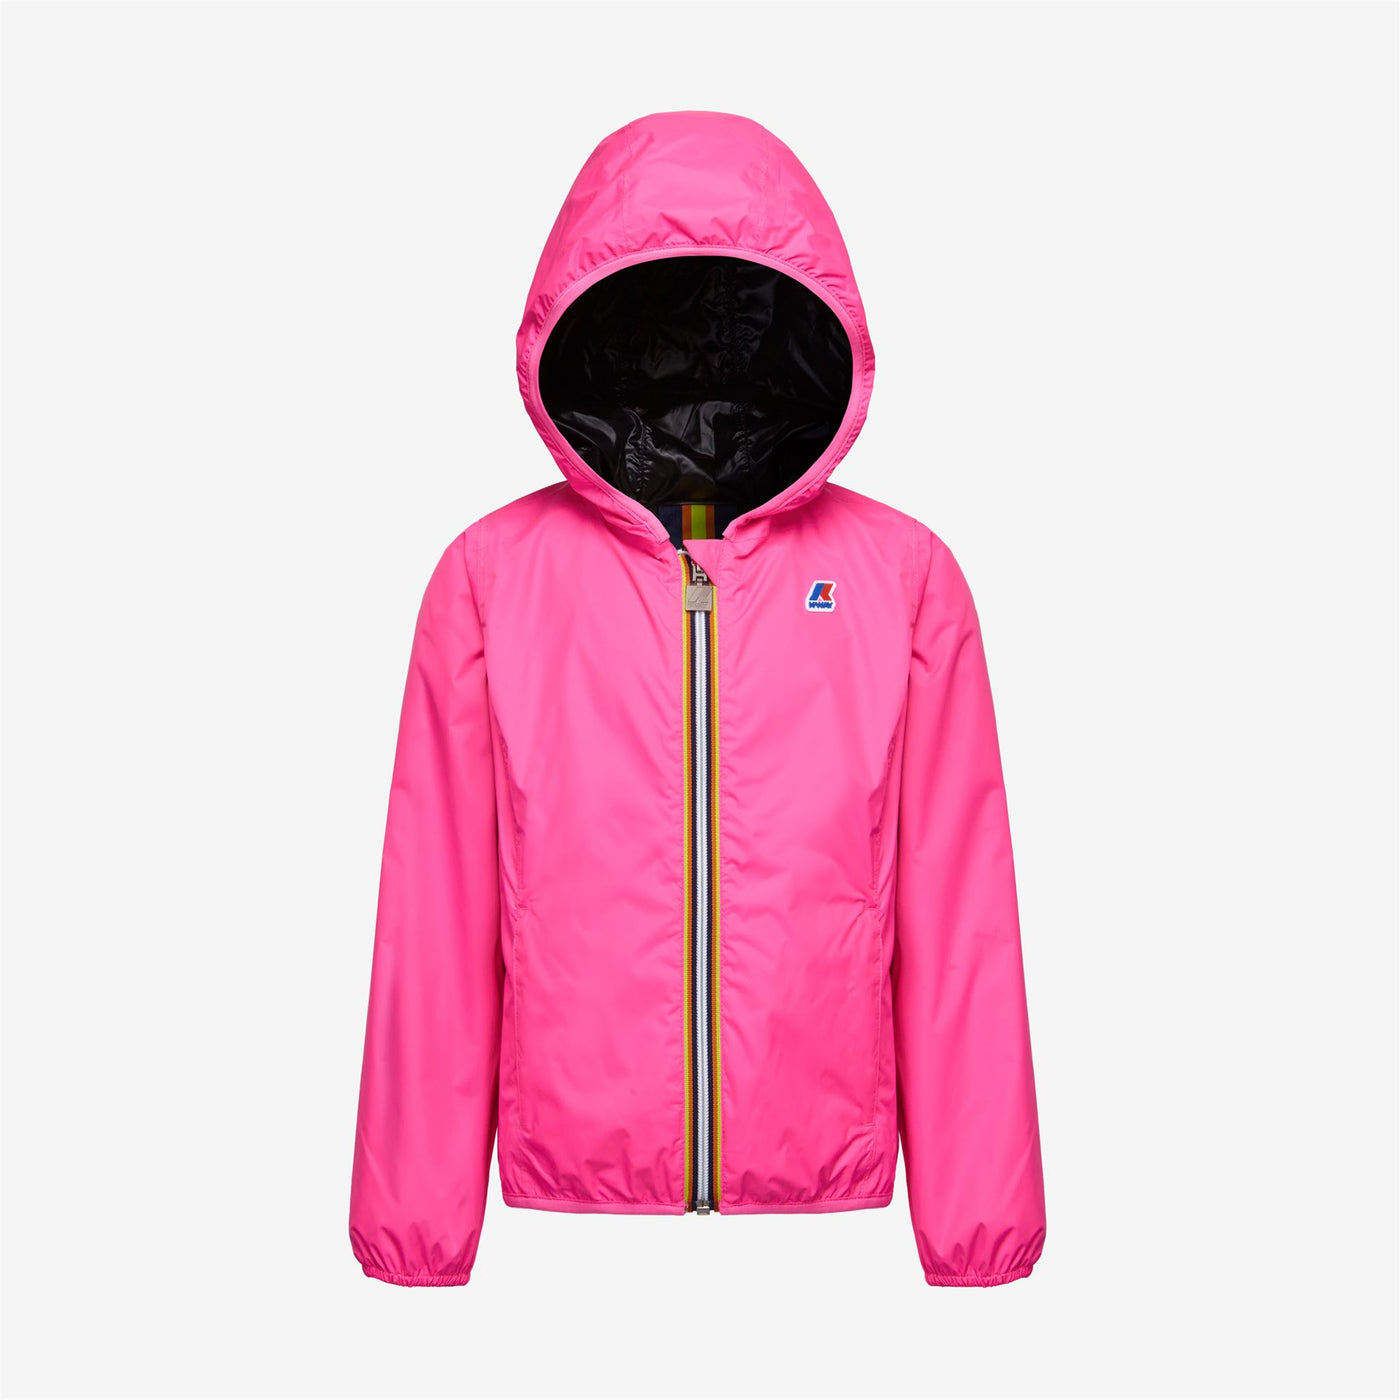 Jackets Girl P. LILY PLUS DOUBLE FLUO Short PINK FLUO-BLACK Photo (jpg Rgb)			